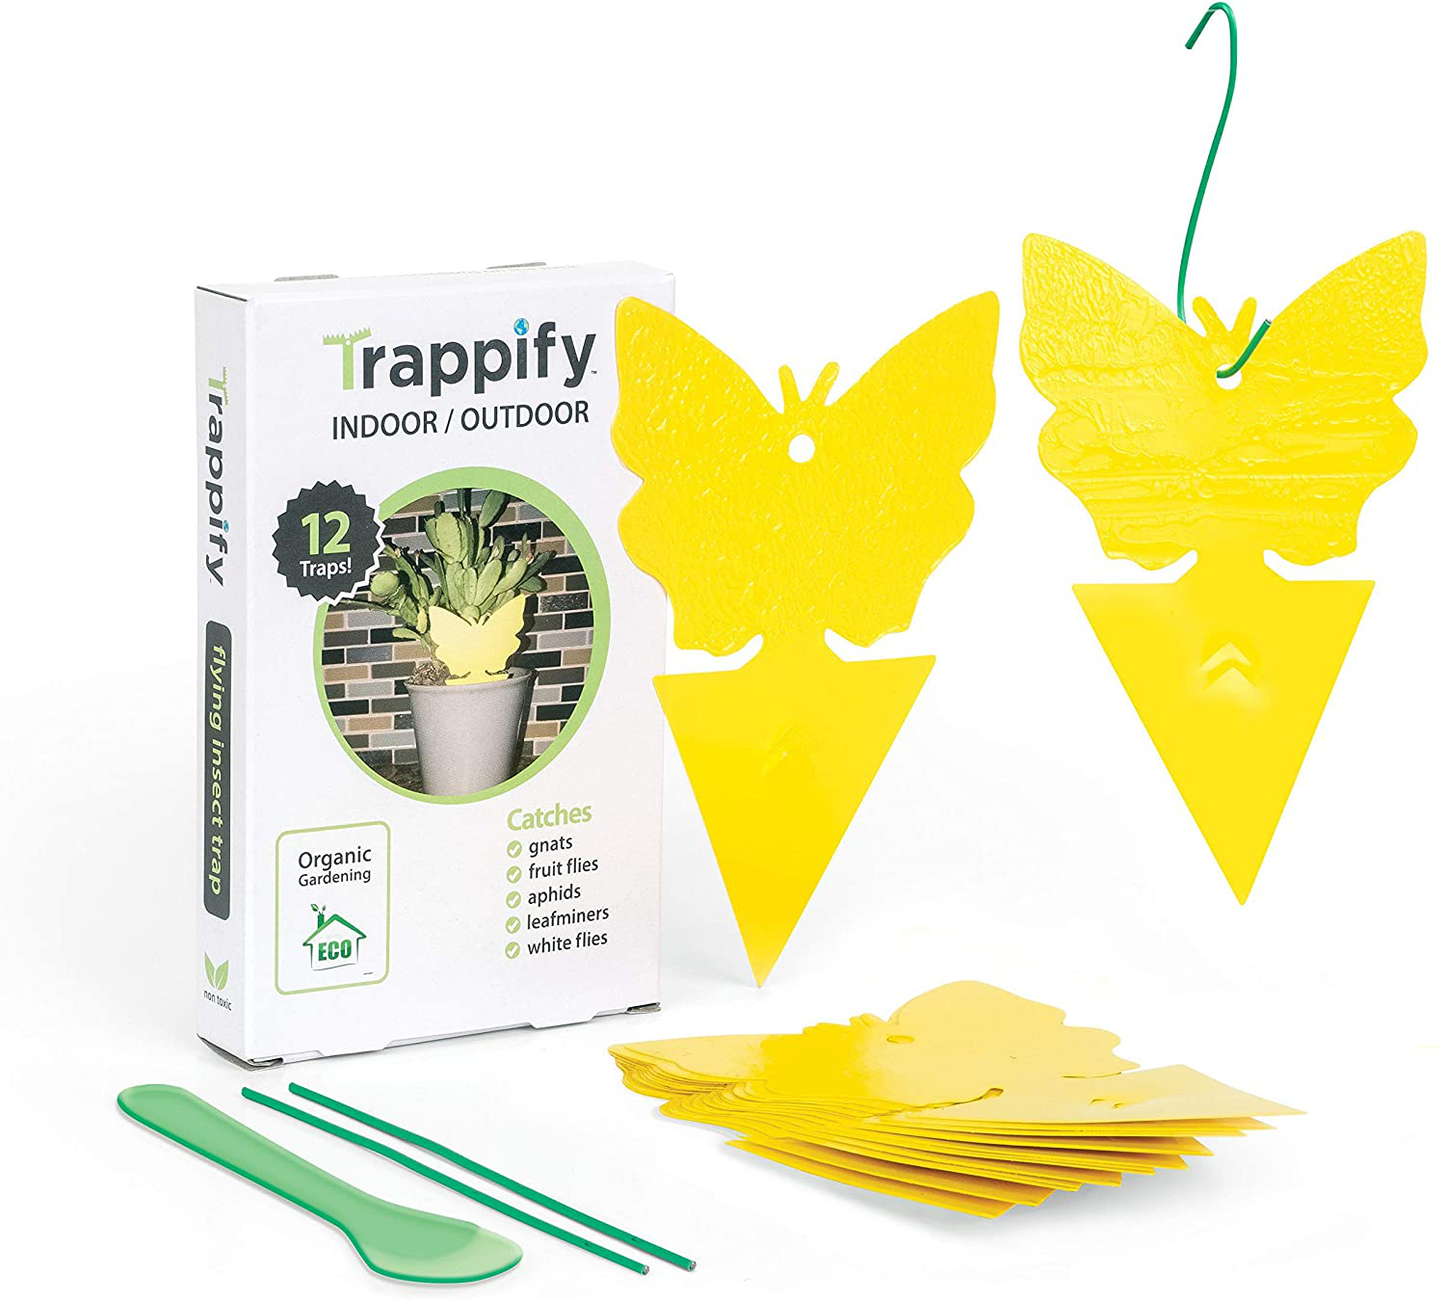 Trappify Sticky Fruit Fly and Gnat Trap Yellow Sticky Bug Traps for Indoor/Outdoor Use - Insect Catcher for White Flies, Mosquitos, Fungus Gnats, Flying Insects - Disposable Glue Trappers (12)